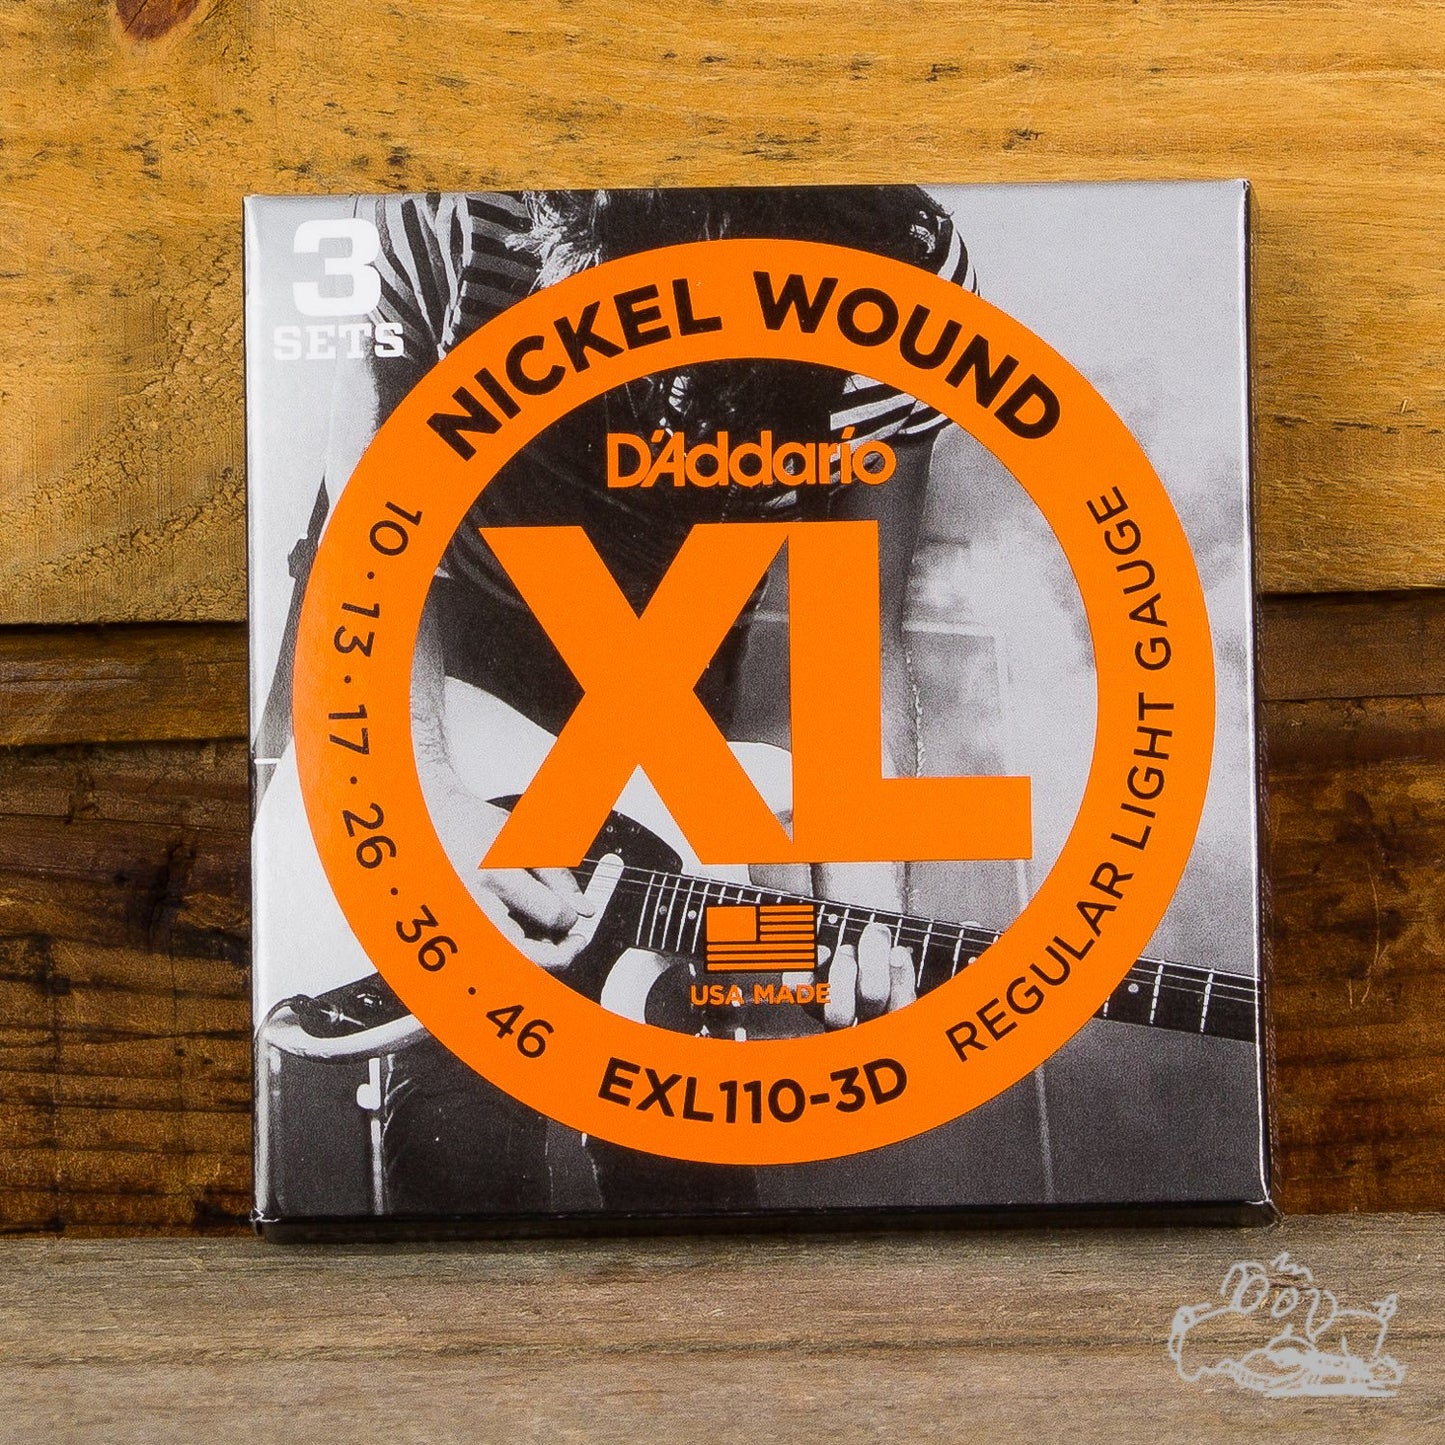 D'Addario XL Electric Guitar Strings Nickel Wound Light 10-46 3-Pack